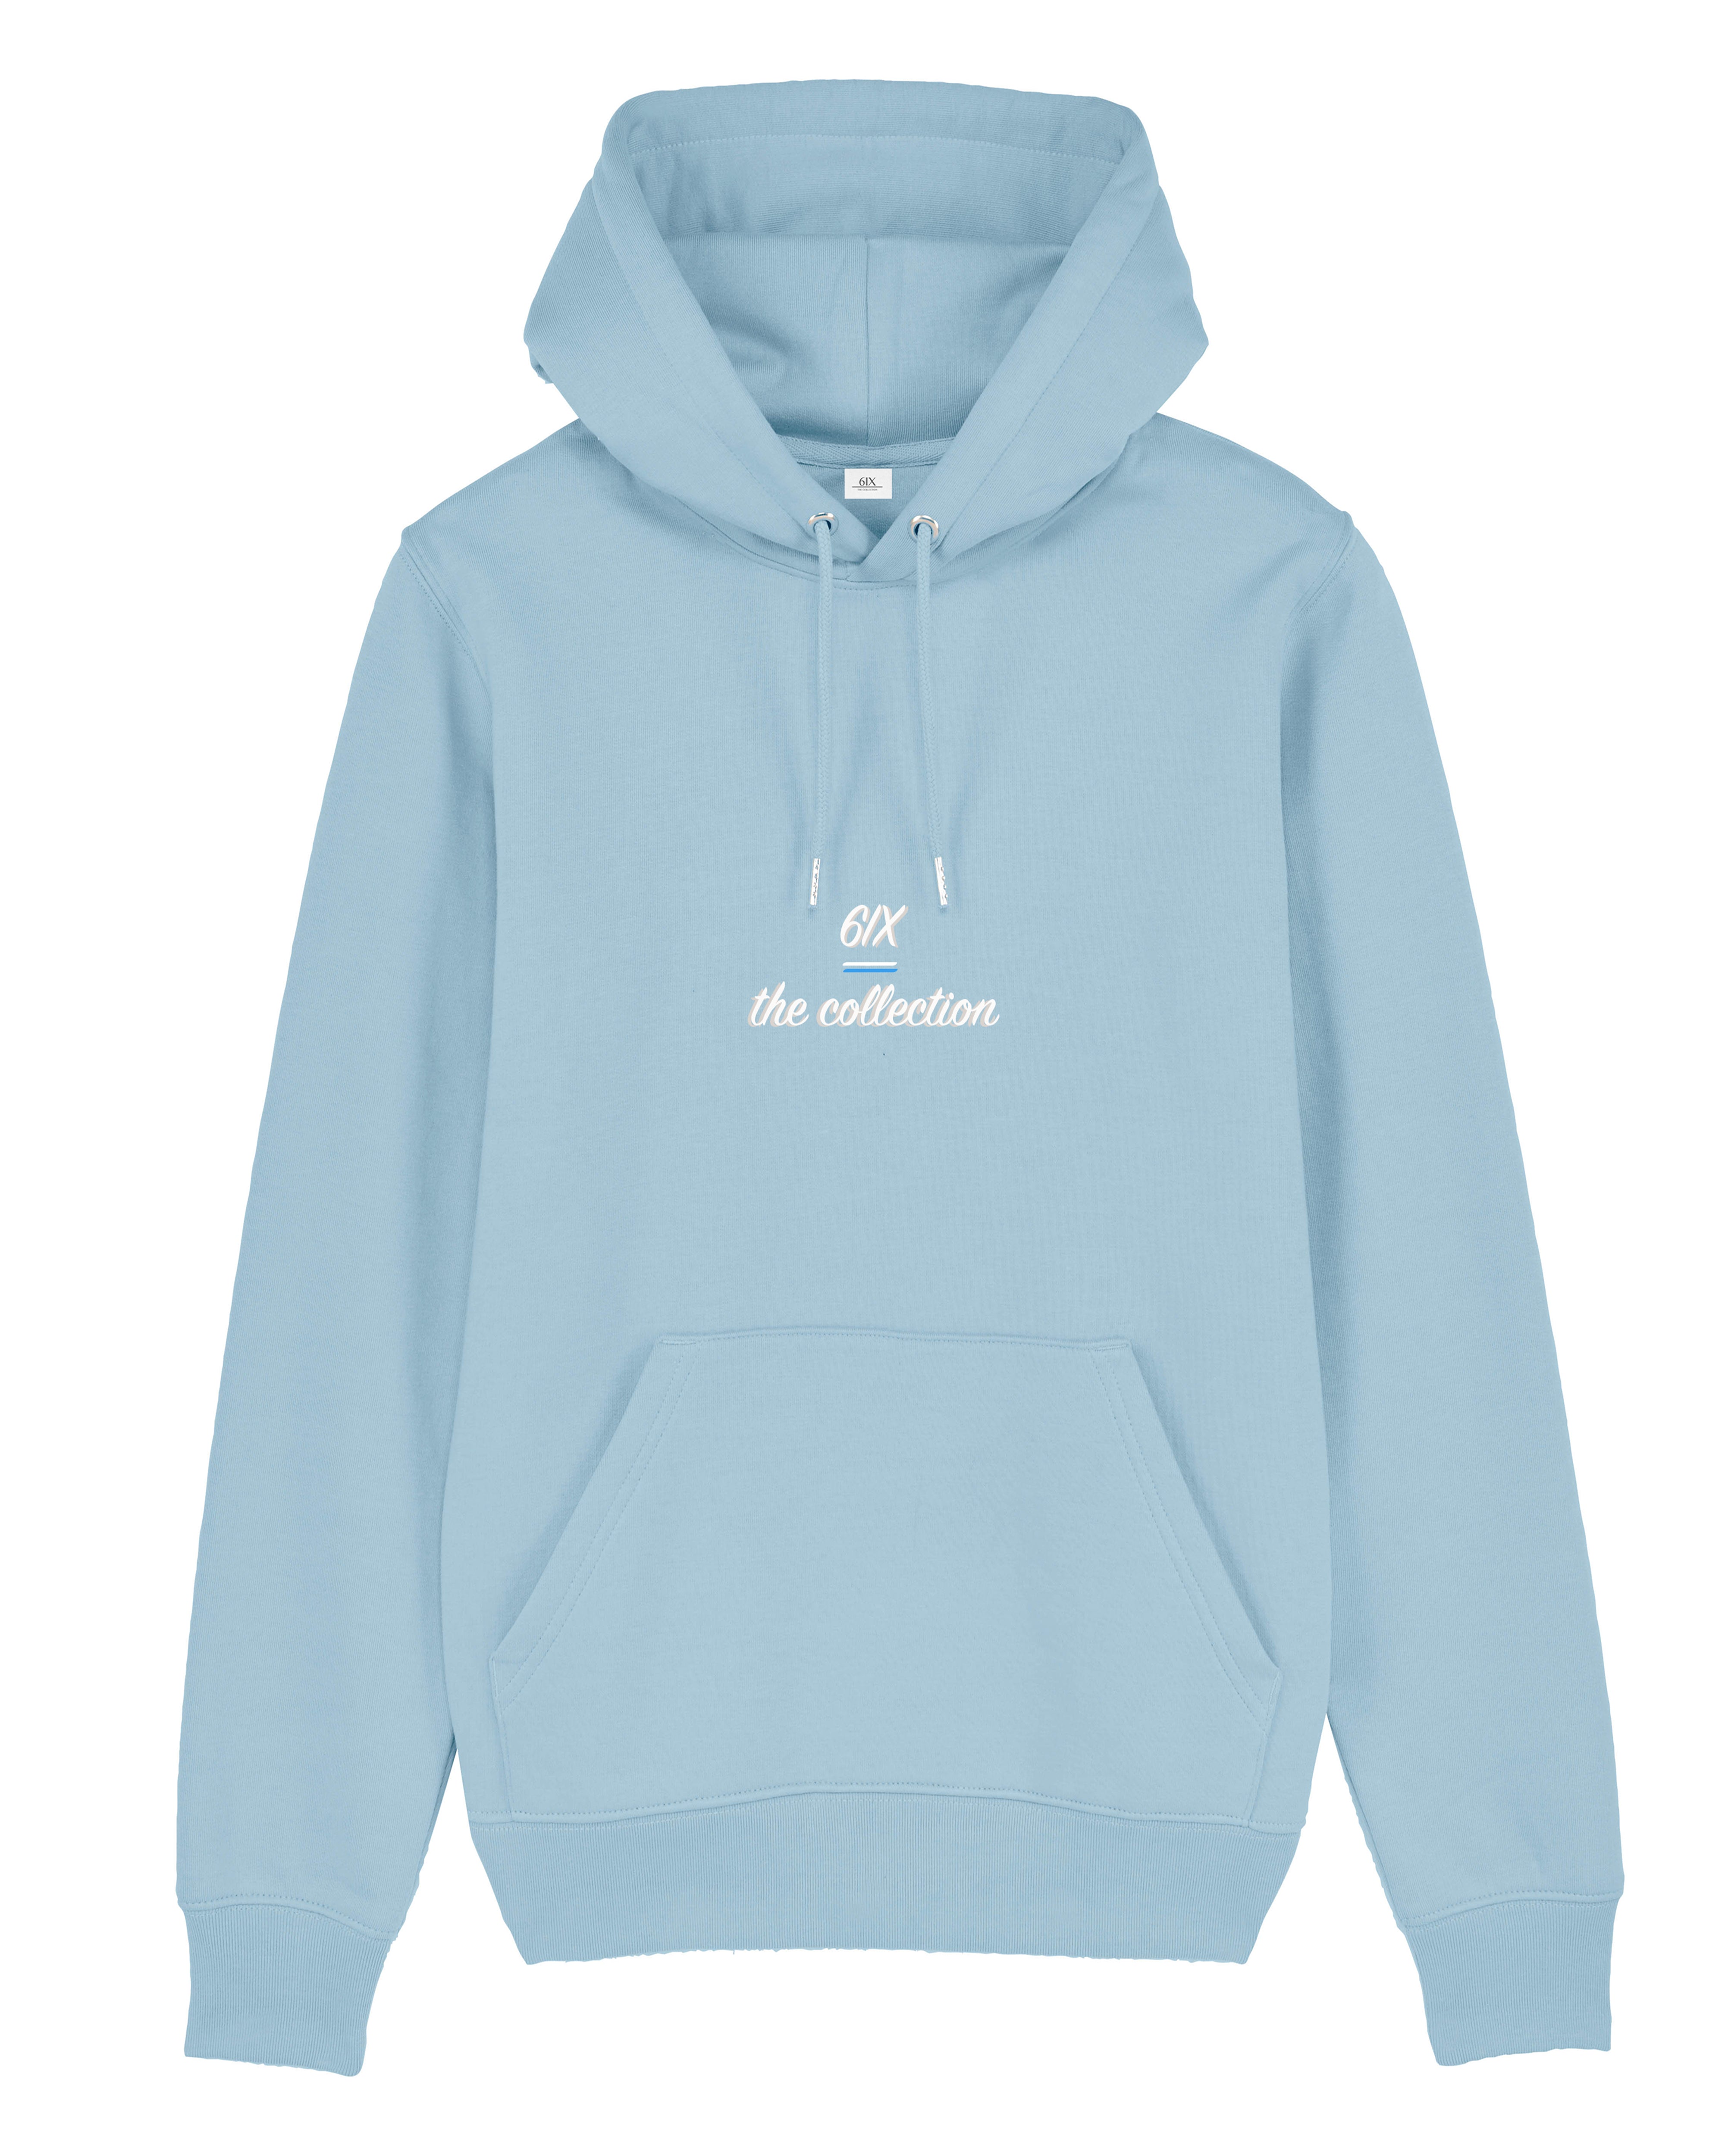 6IX 'THE COLLECTION' HOODIE - SKY BLUE - 6IX Collection 